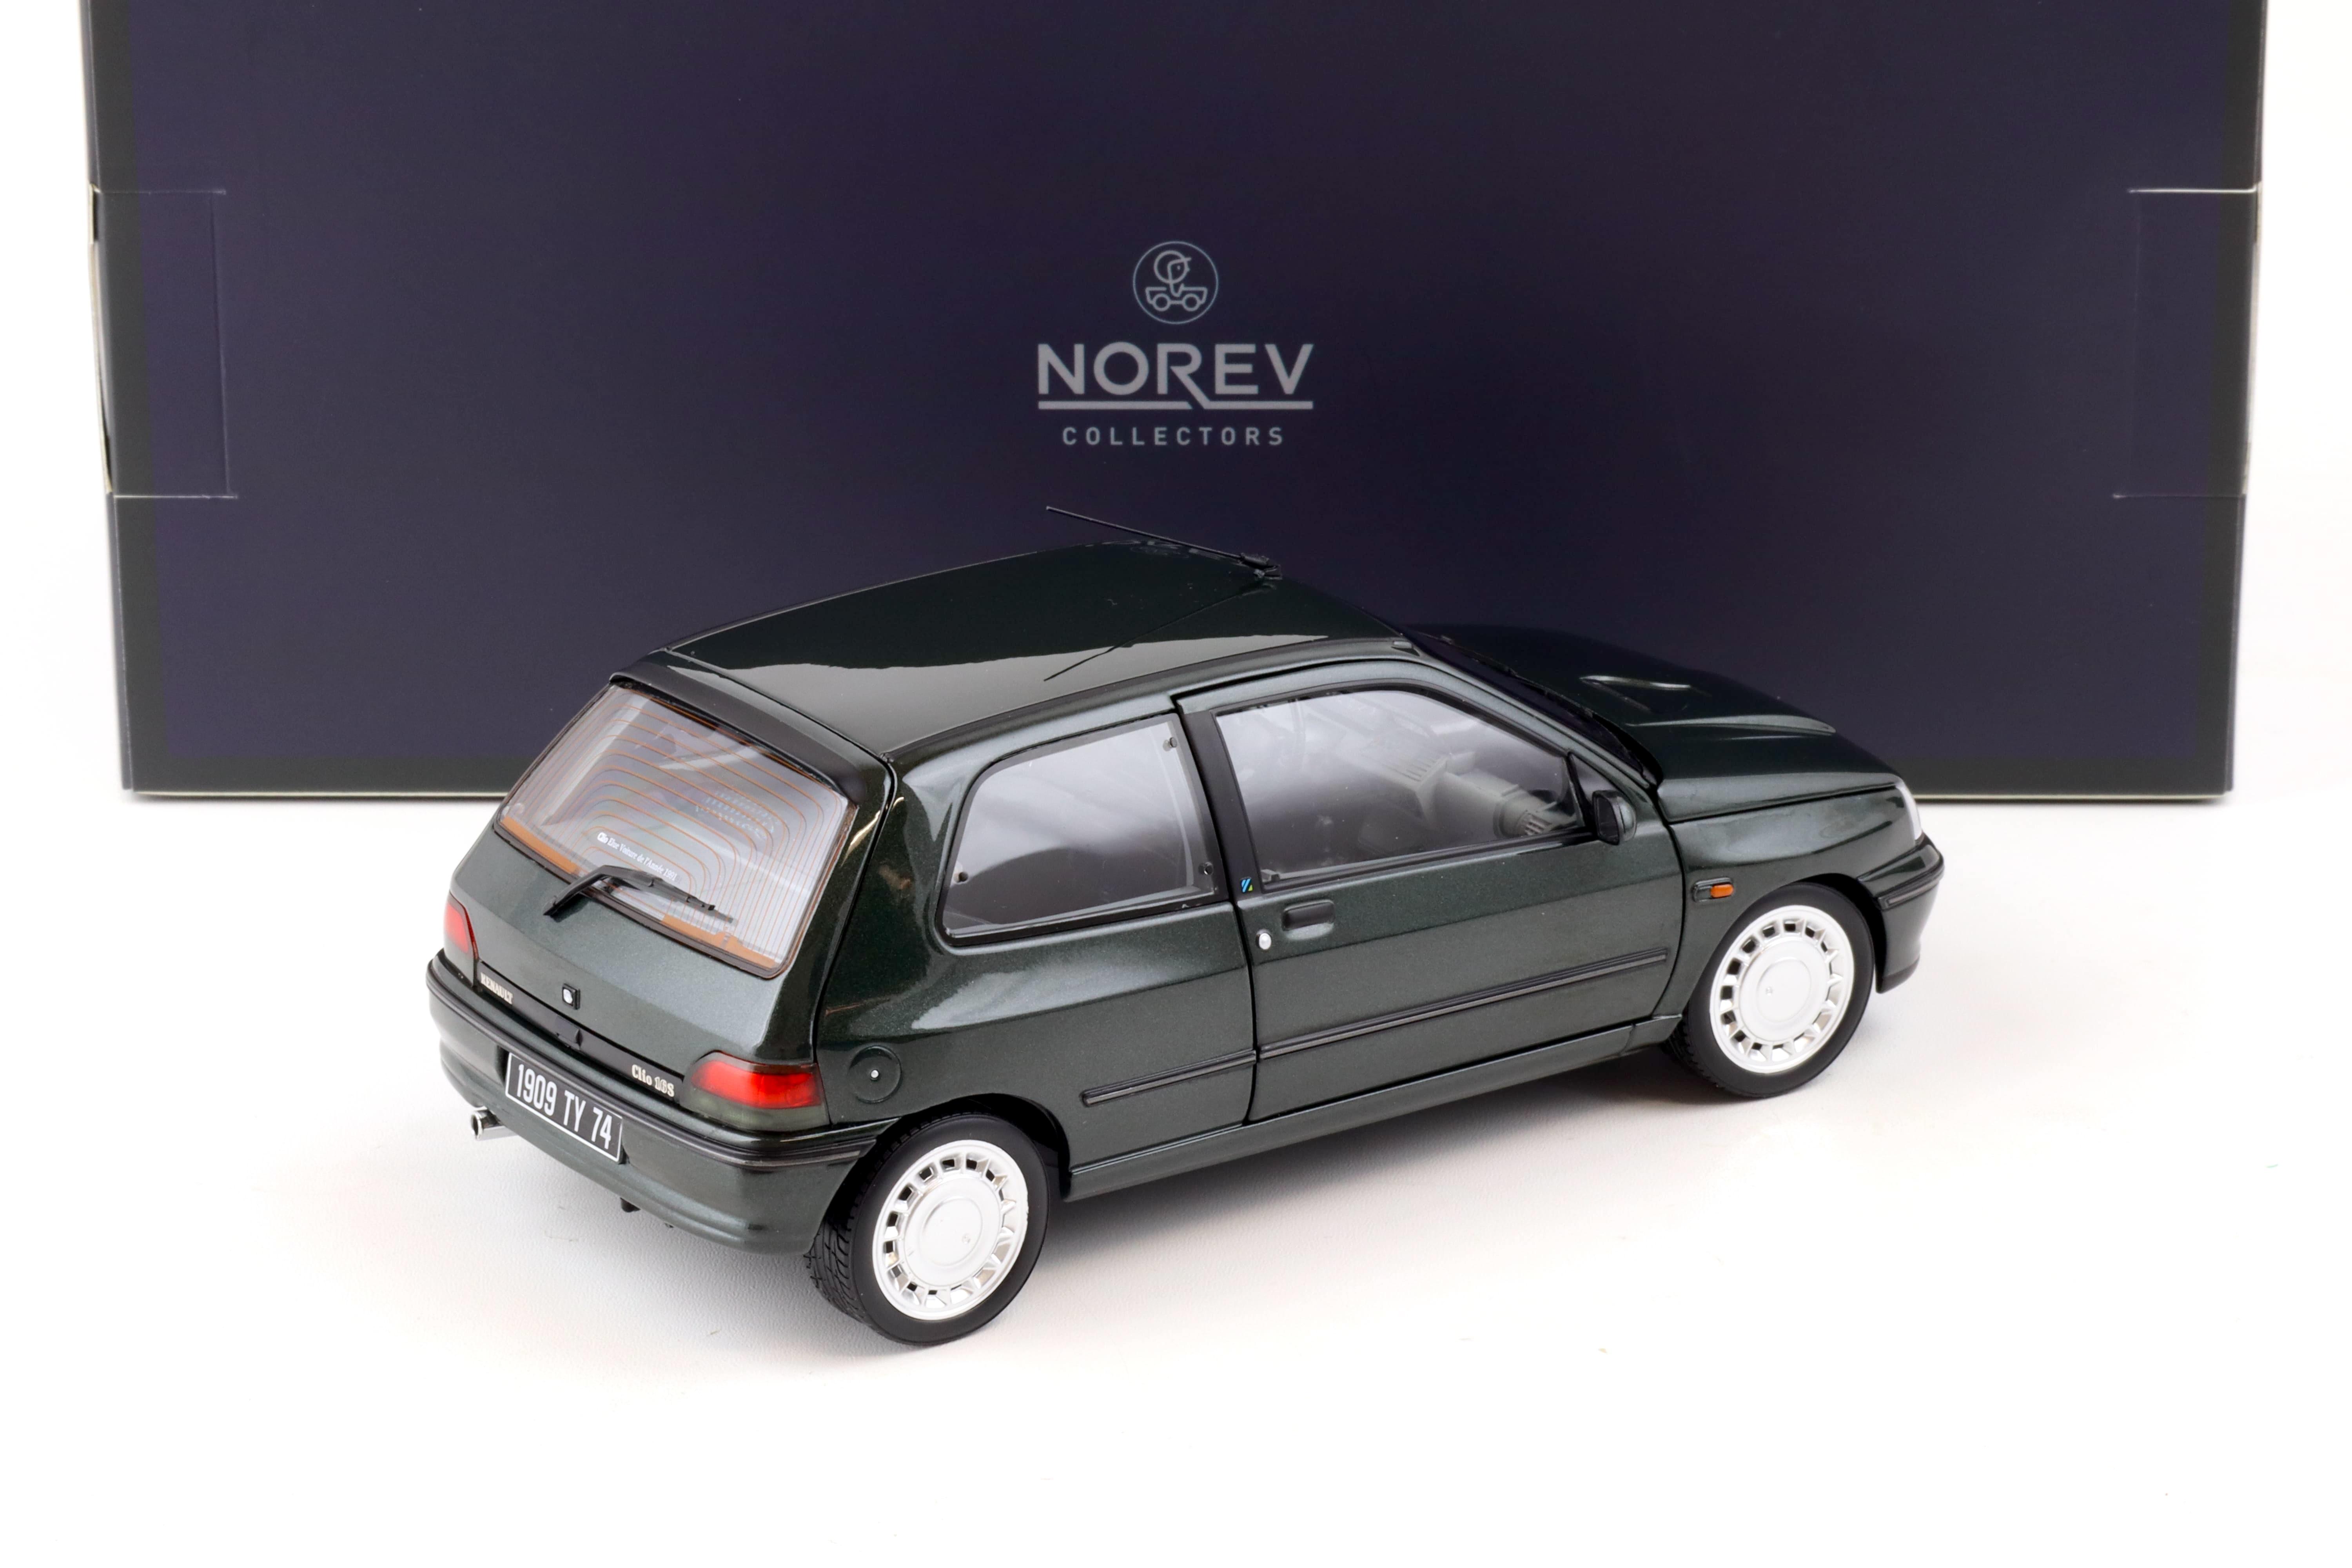 1:18 Norev Renault Clio 16S Tyrol green 1992 - Limited 400 pcs.